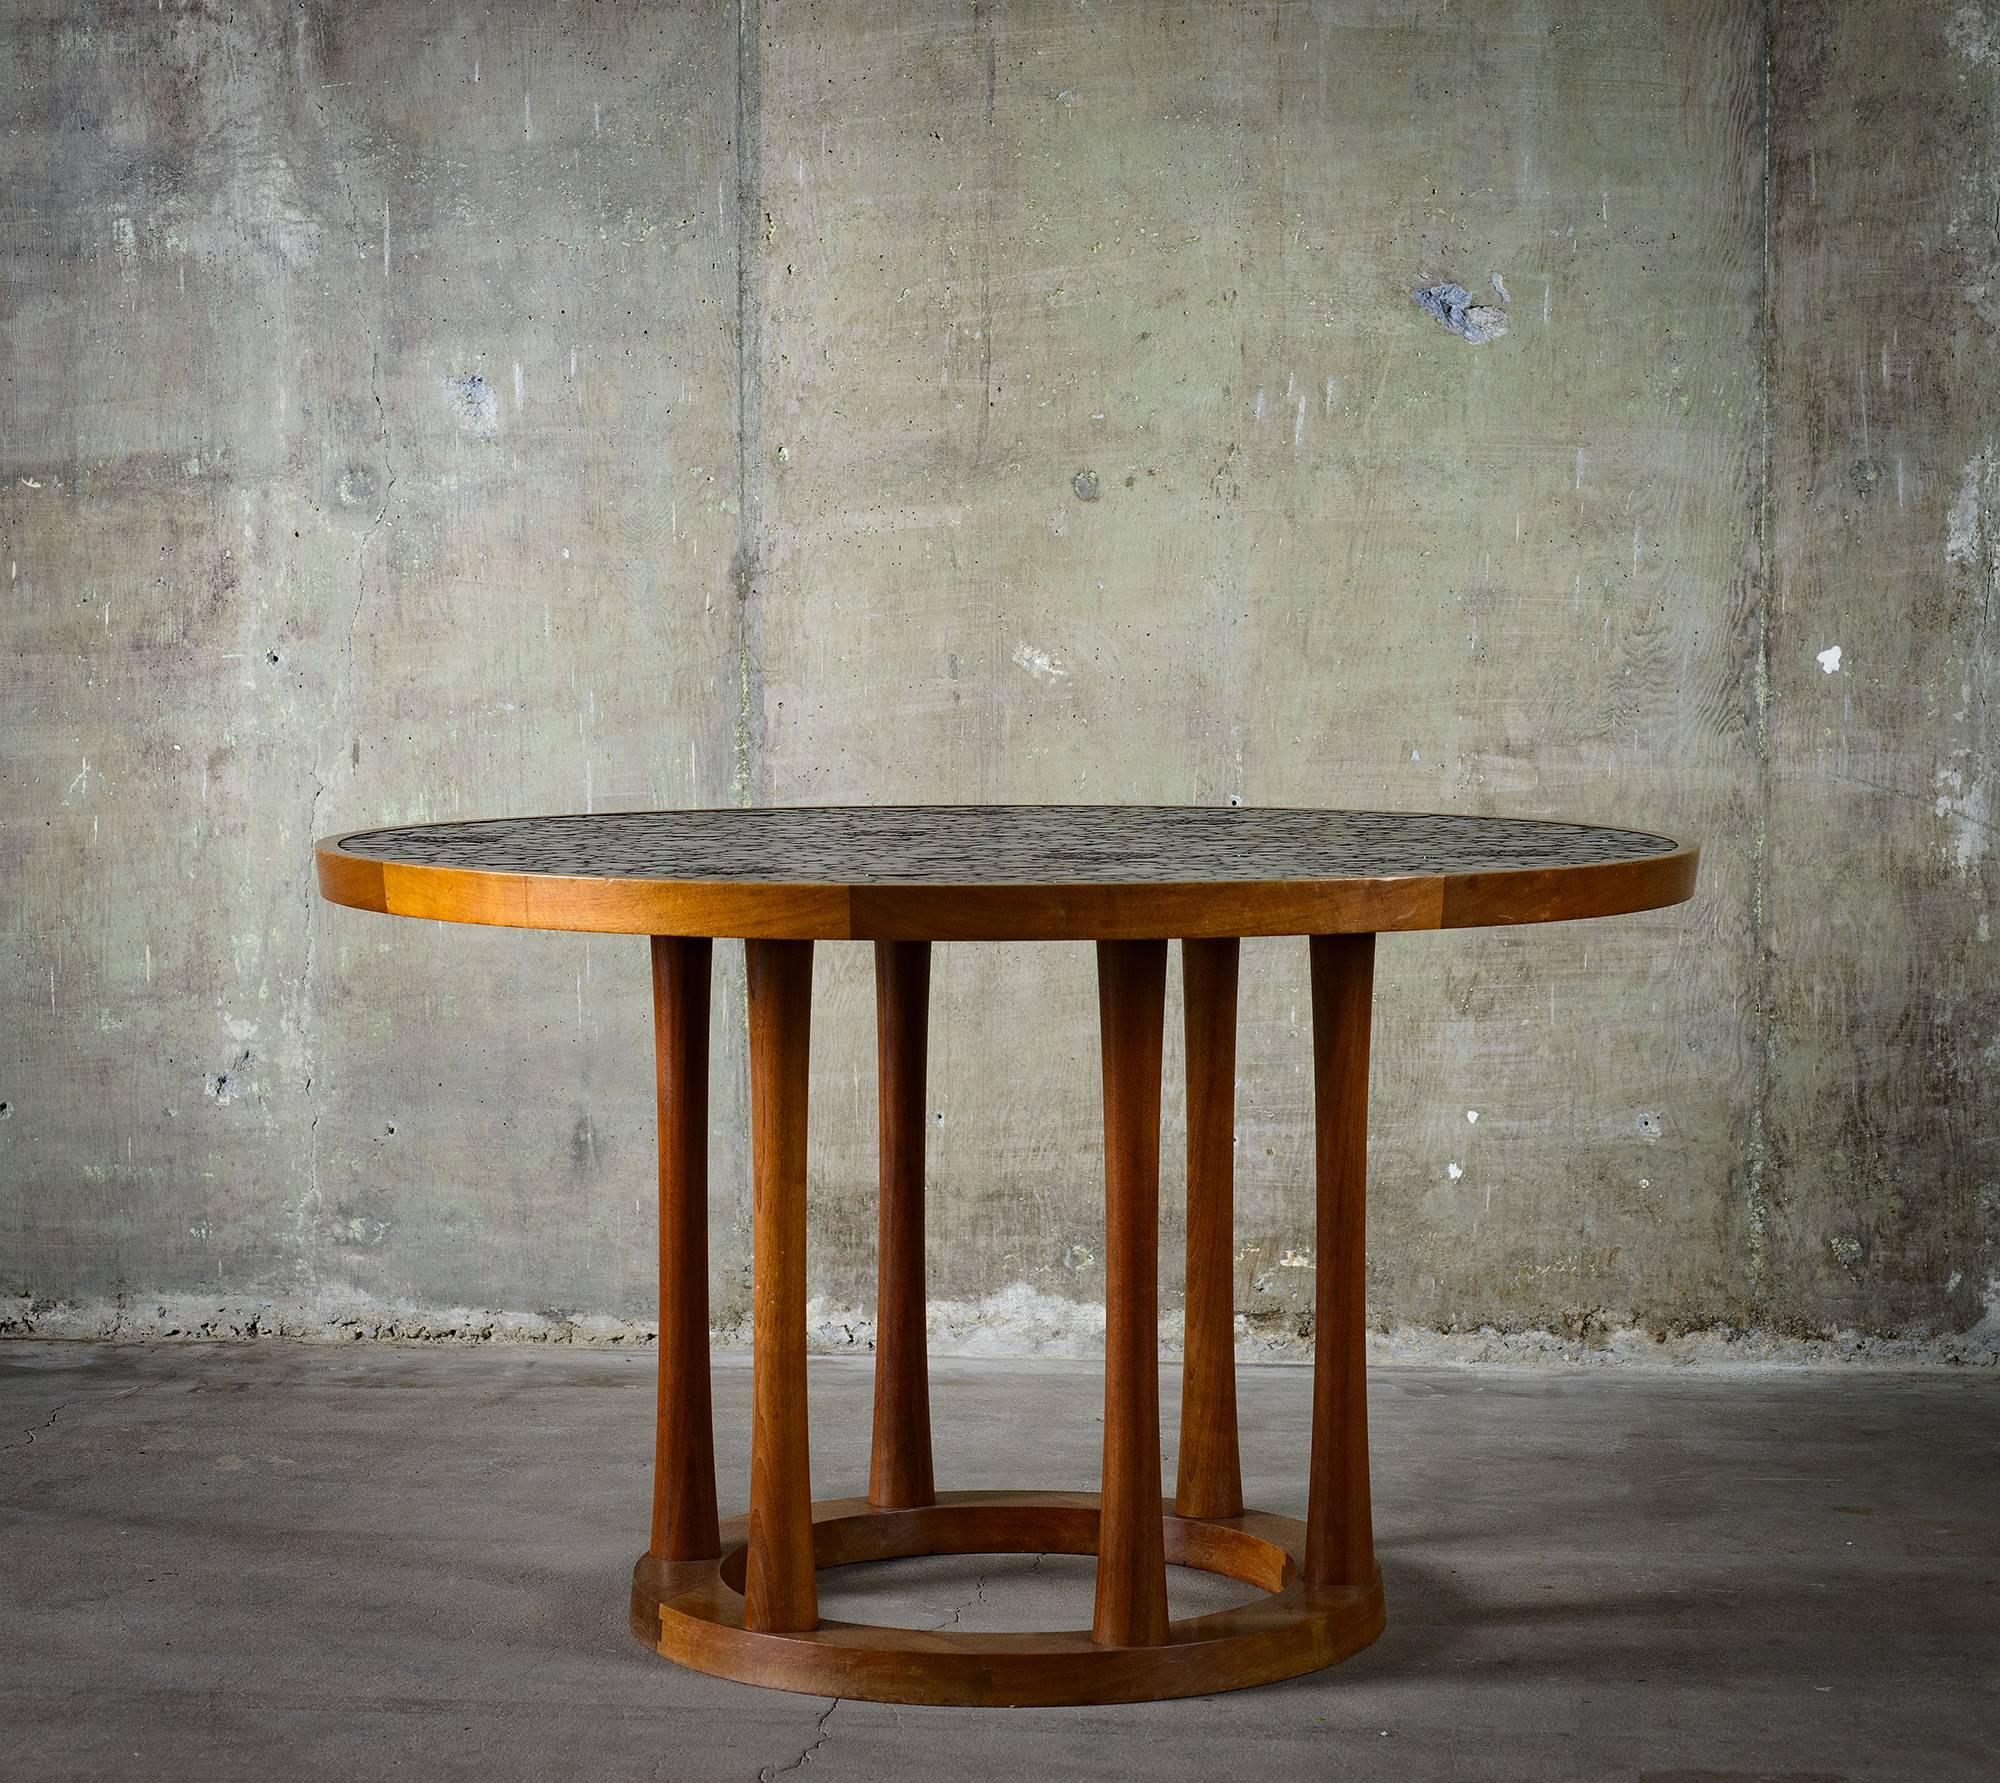 Modern Marshall Studios Dining Table with Round Black Glazed Tiles and Walnut, 1960s